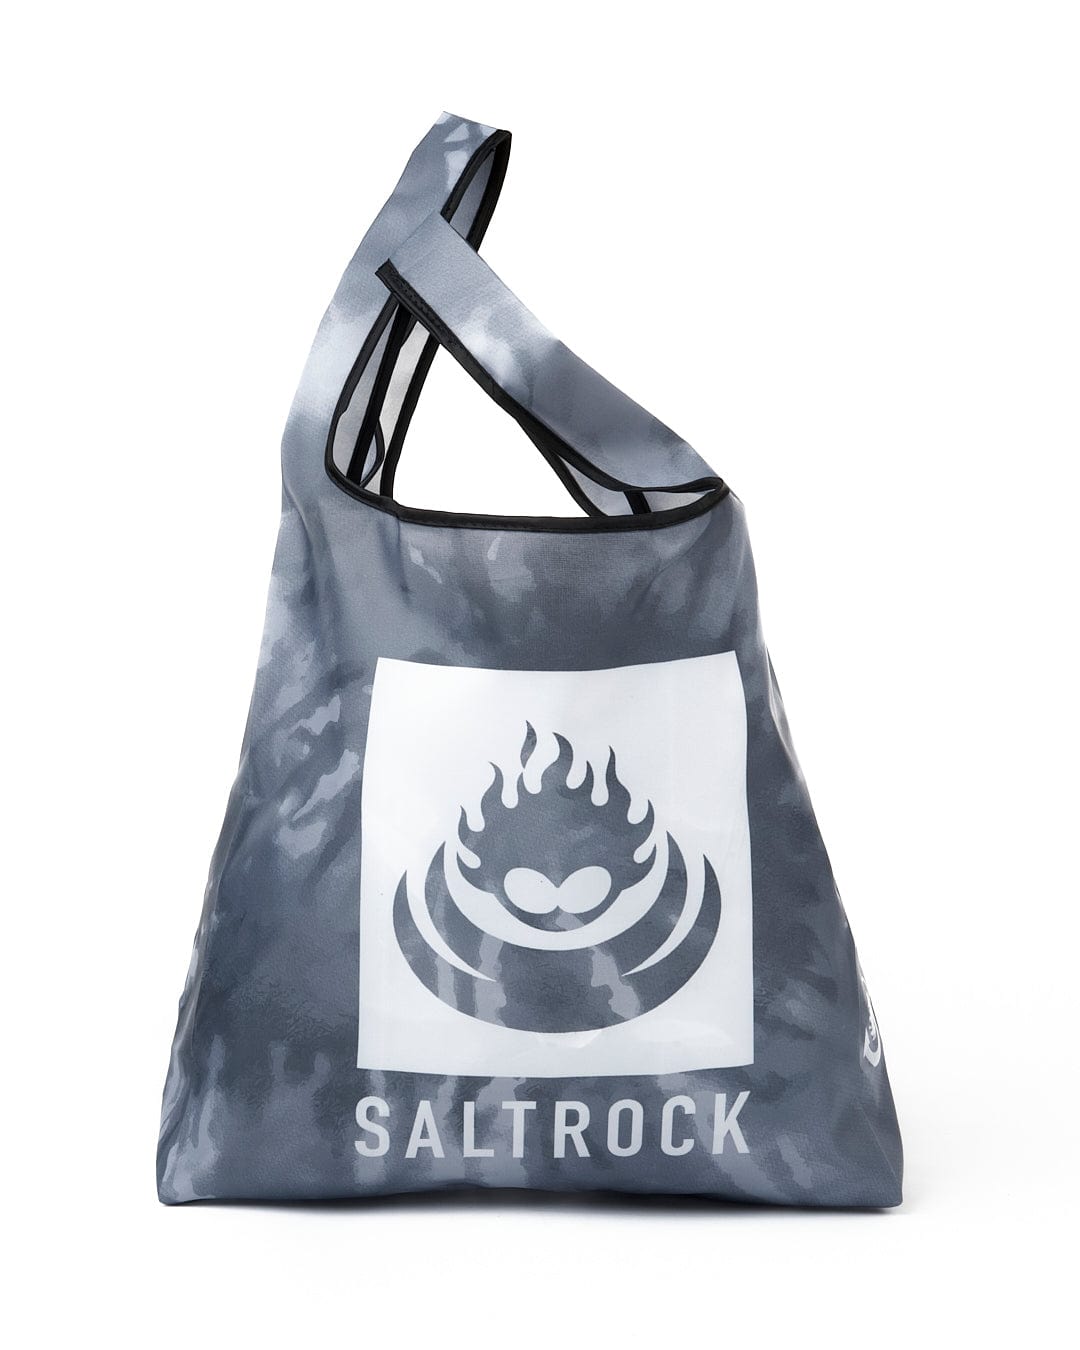 A sustainable Salvage - Recycled Shopper Bag - Dark Grey, made from recycled materials, featuring the iconic Saltrock logo.